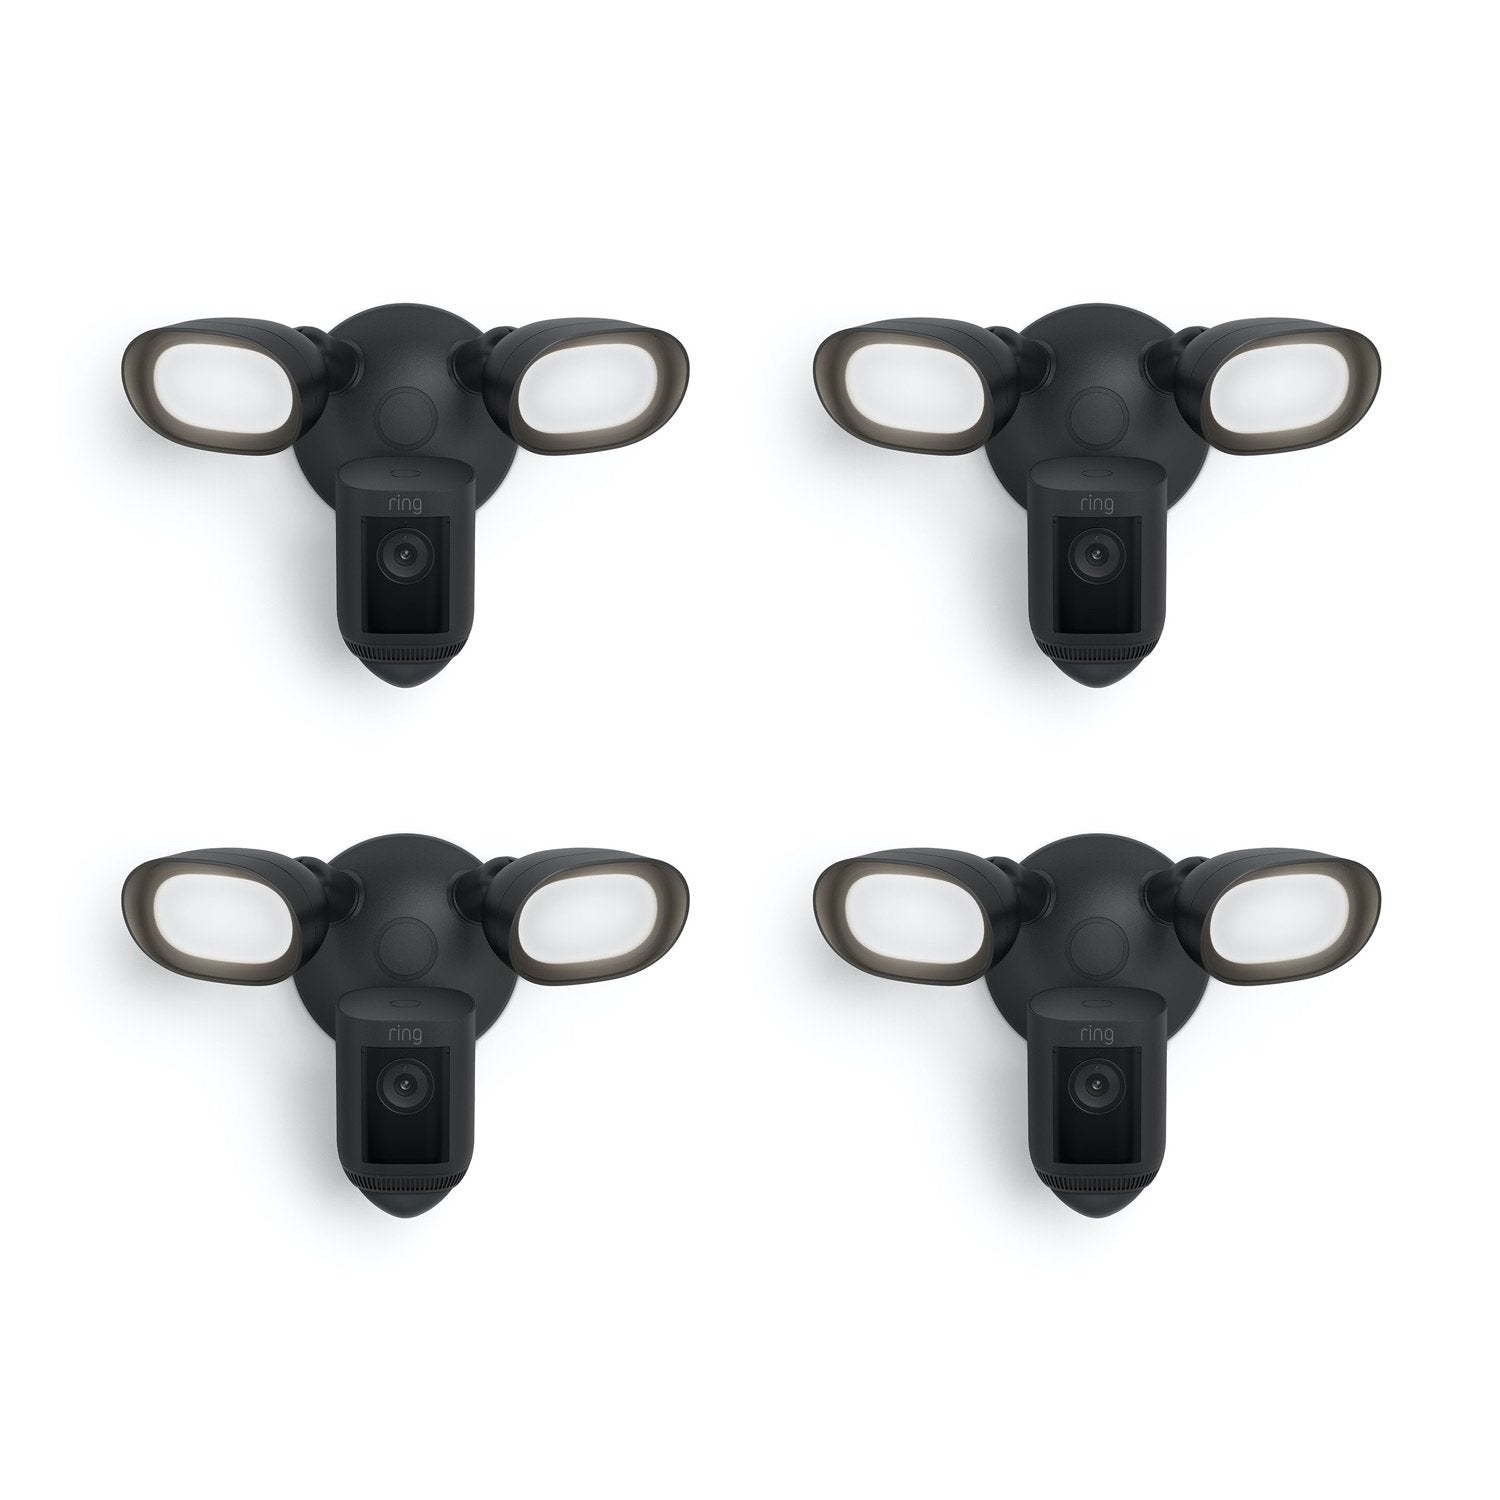 4-Pack Floodlight Cam Pro (Wired) - Black